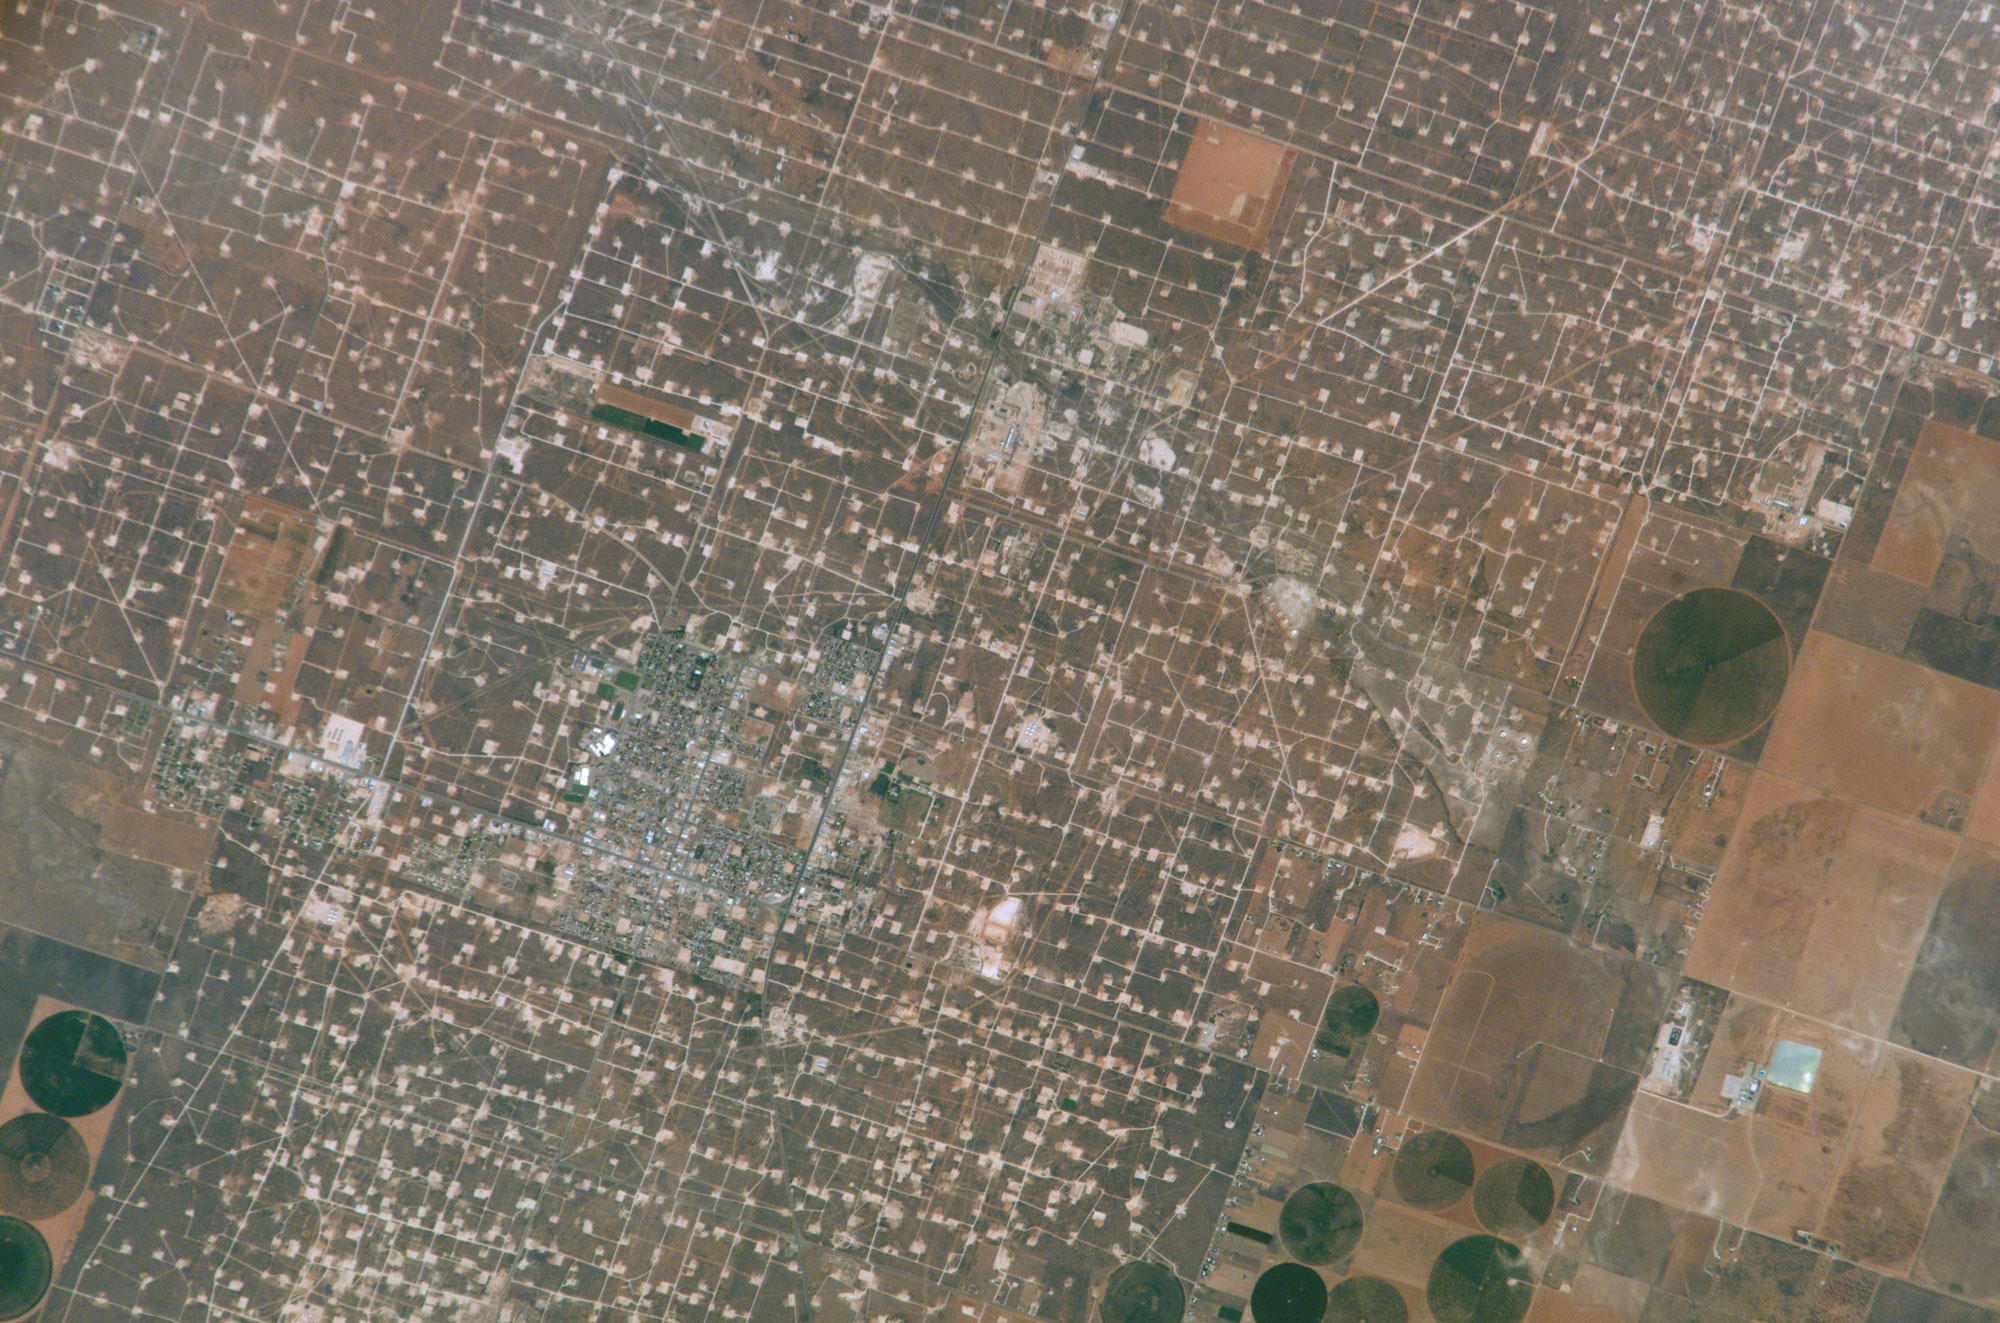 Photograph taken from space by an astronaut showing development for oil extraction in Wasson Oil Field, Texas. The photo shows a rough grid of roads and pads for oil wells.